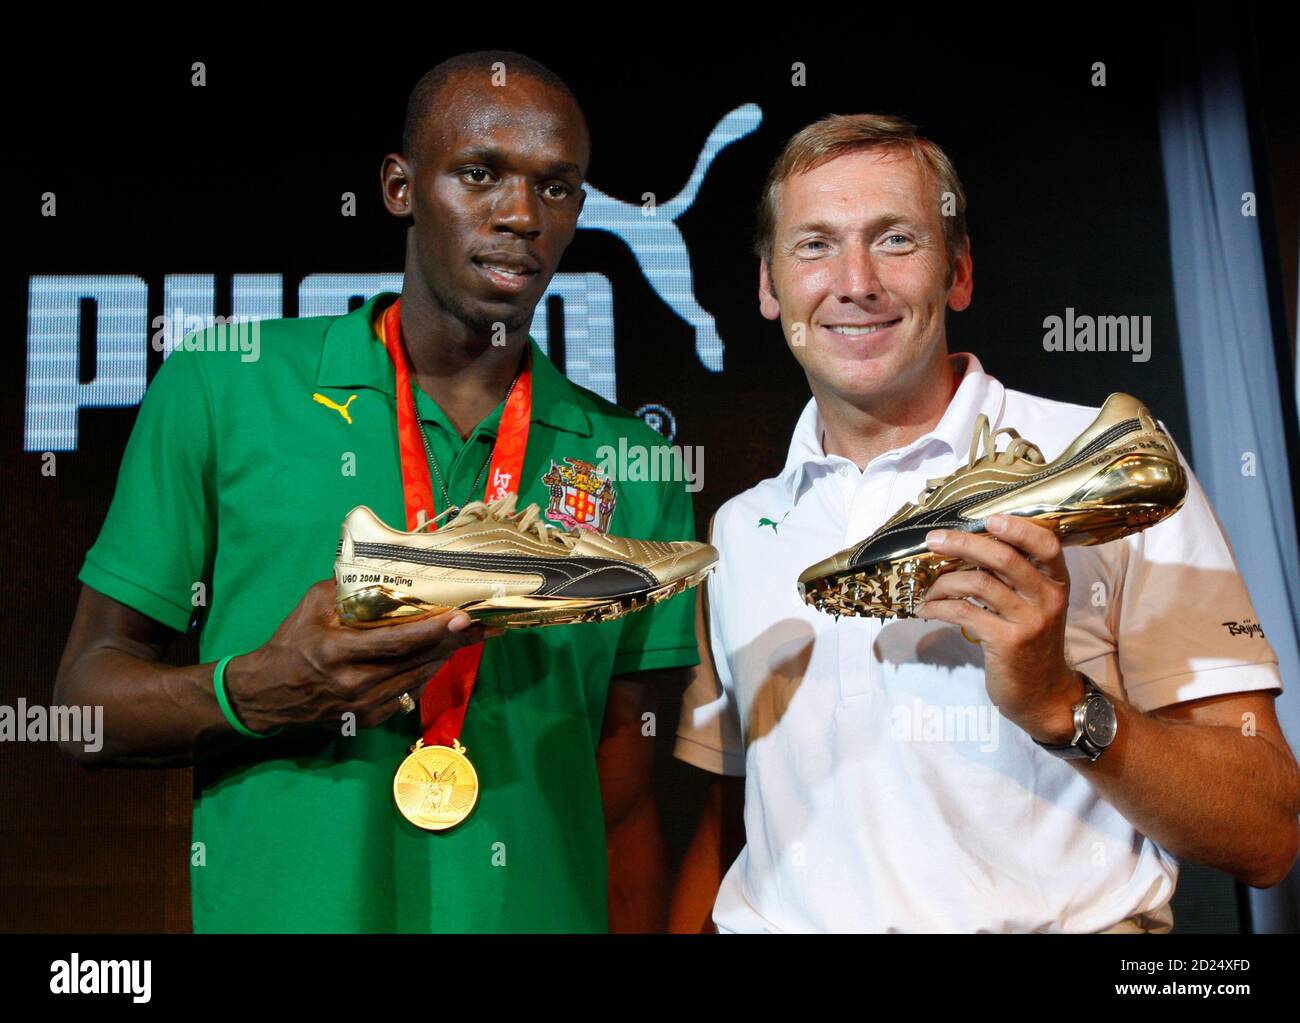 Usain Bolt of Jamaica (L) and Jochen Zeitz, CEO and Chairman of the Board  of Puma, show Bolt Puma shoes during a news conference in Beijing August  23, 2008. REUTERS/Gil Cohen Magen (